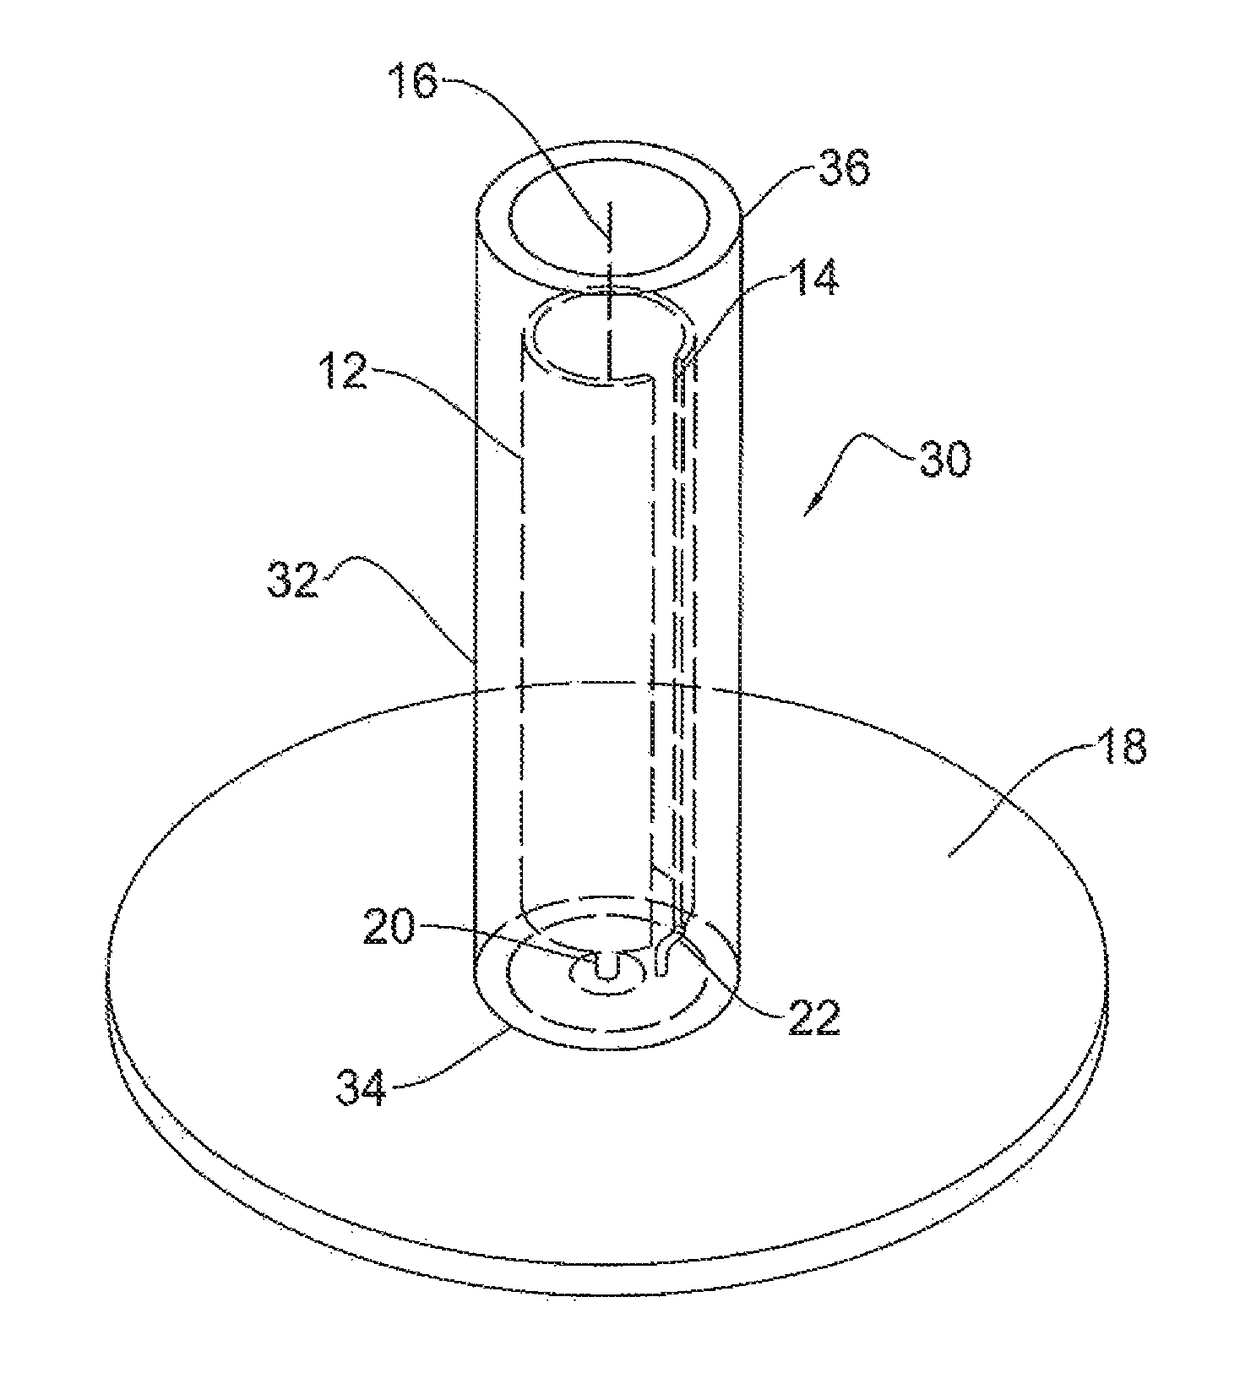 Slotted antenna with uniaxial dielectric covering